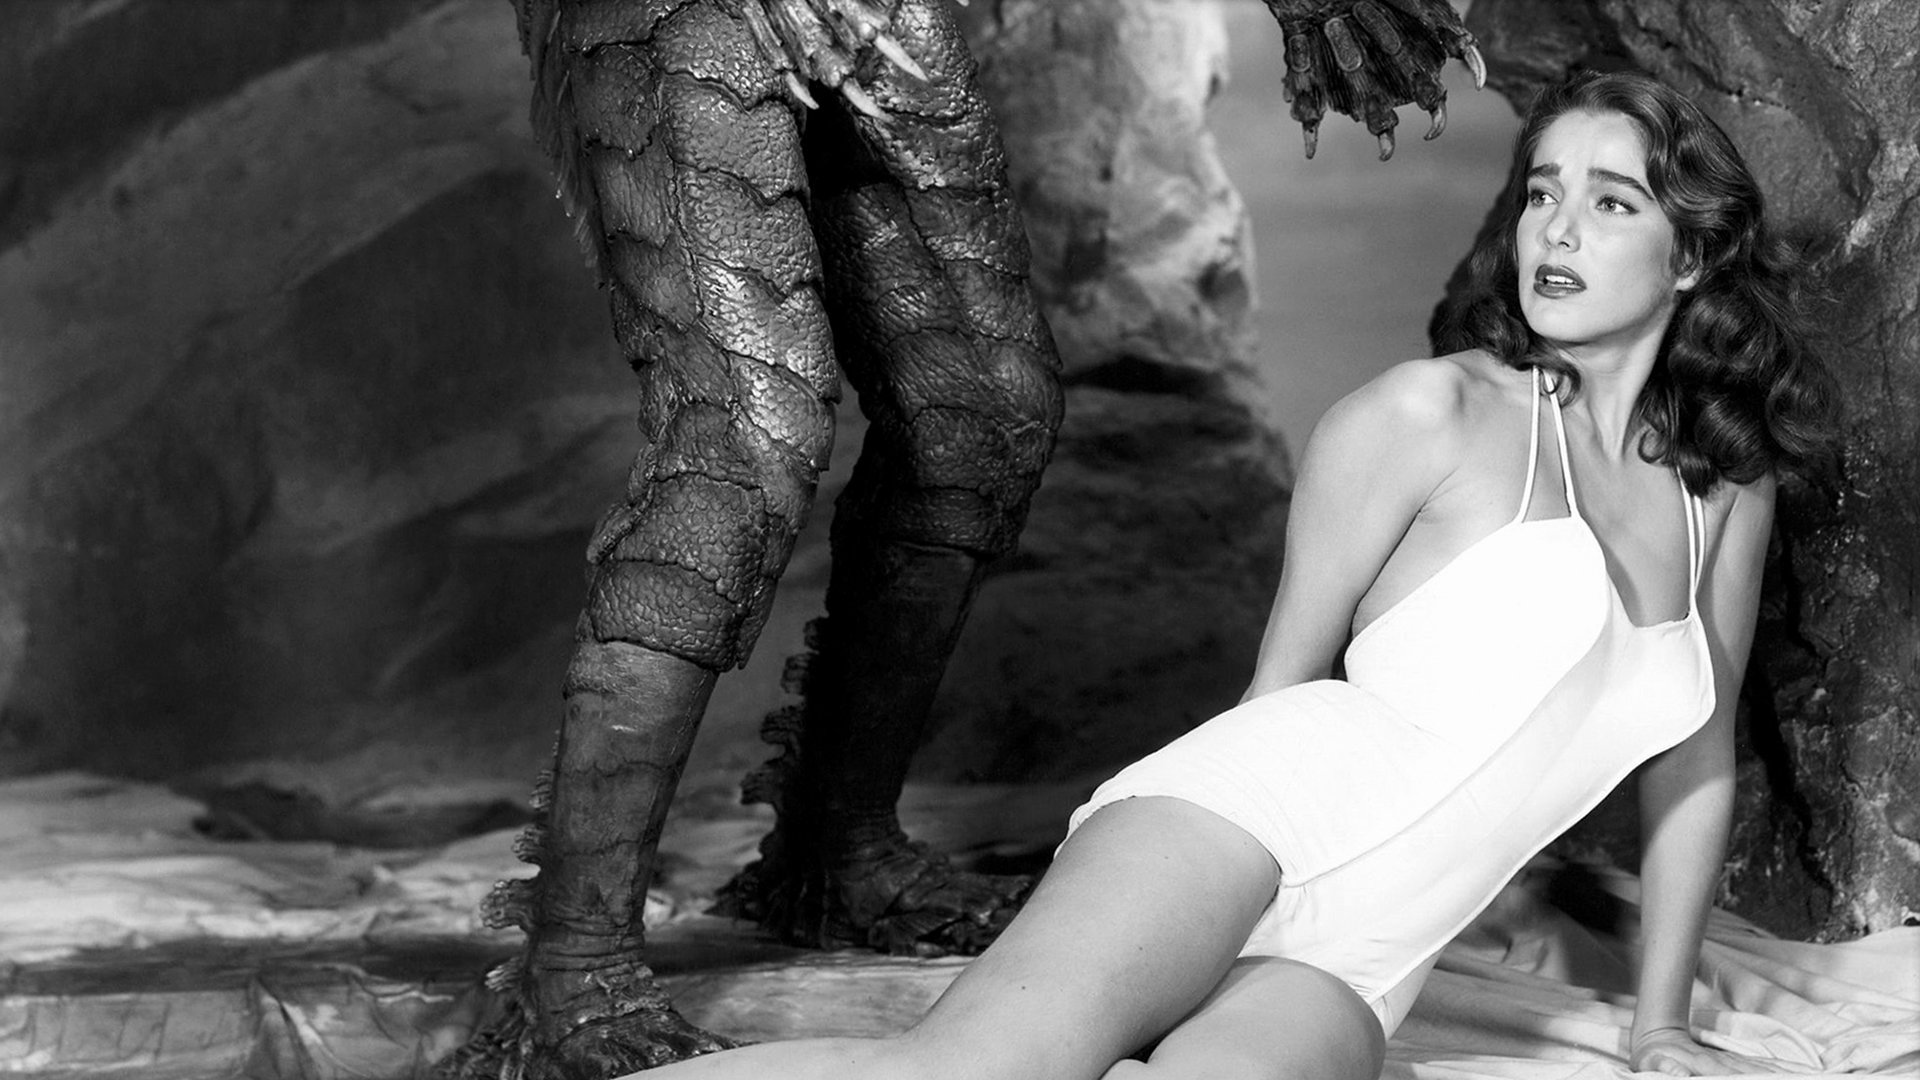 Awesome Creature From The Black Lagoon free wallpaper ID:81206 for full hd 1920x1080 desktop